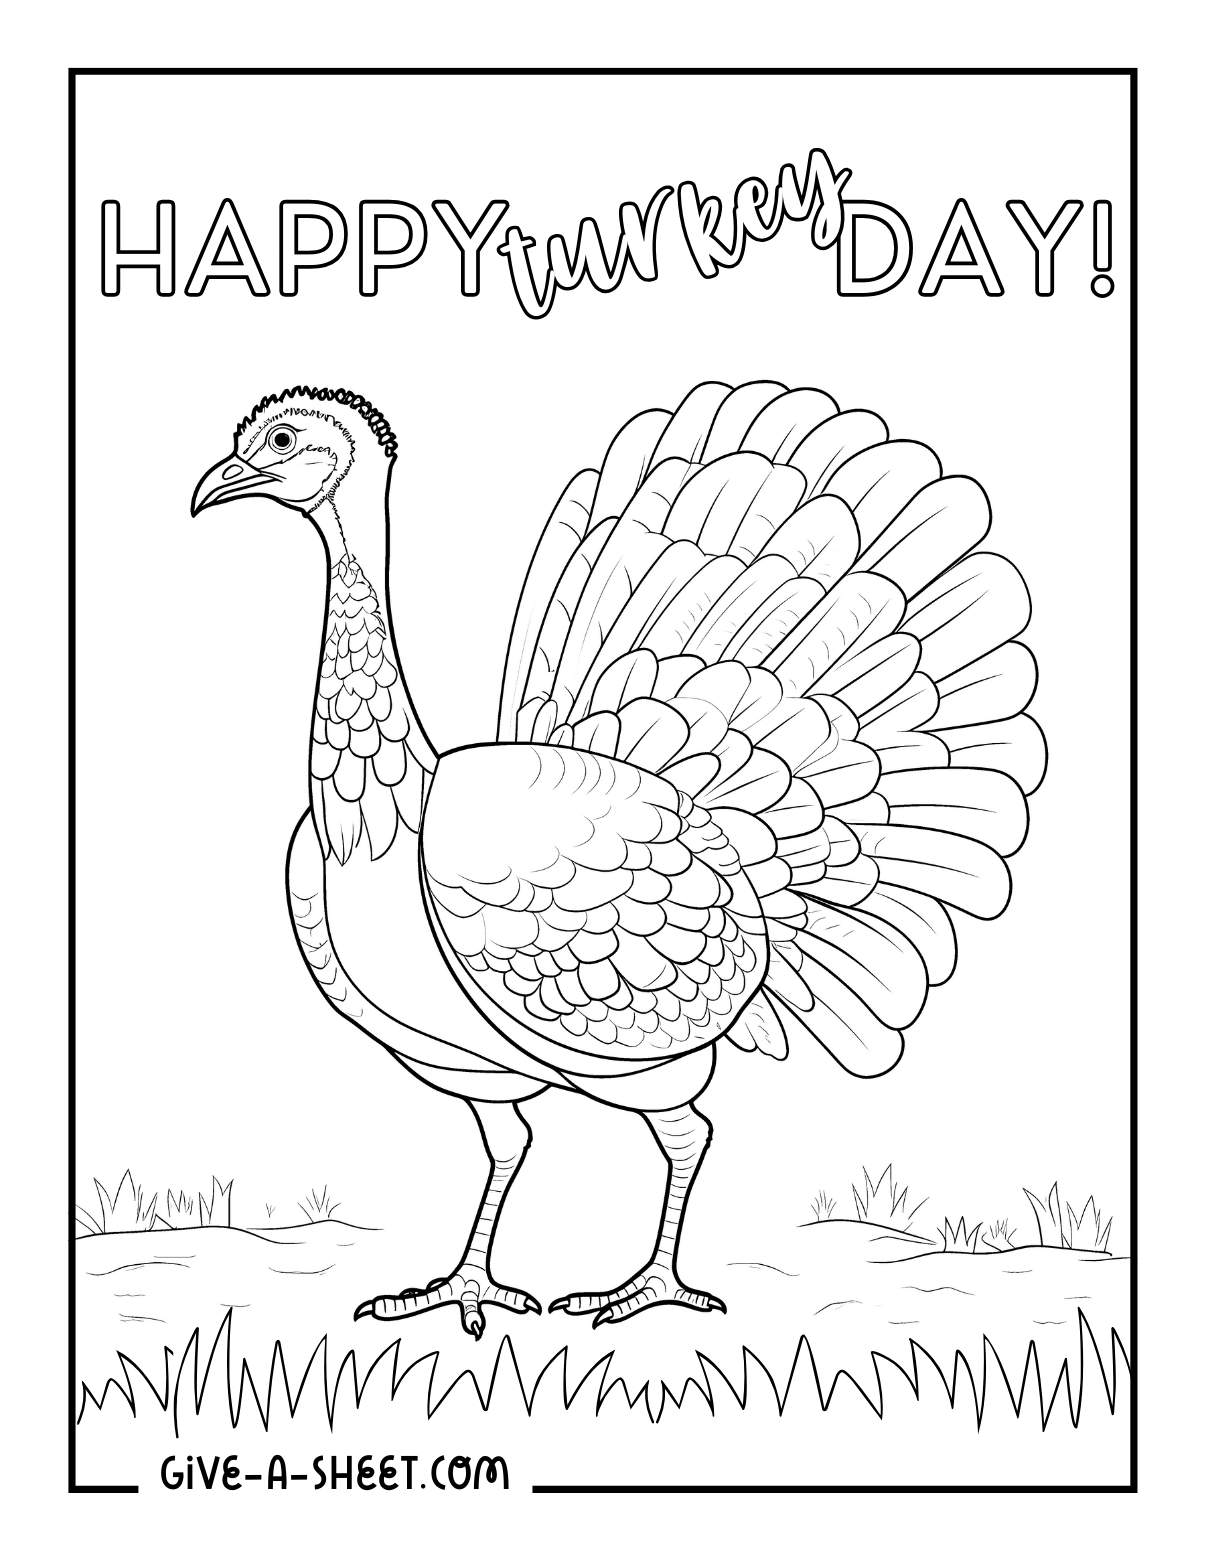 Happy turkey day coloring pages for adults.